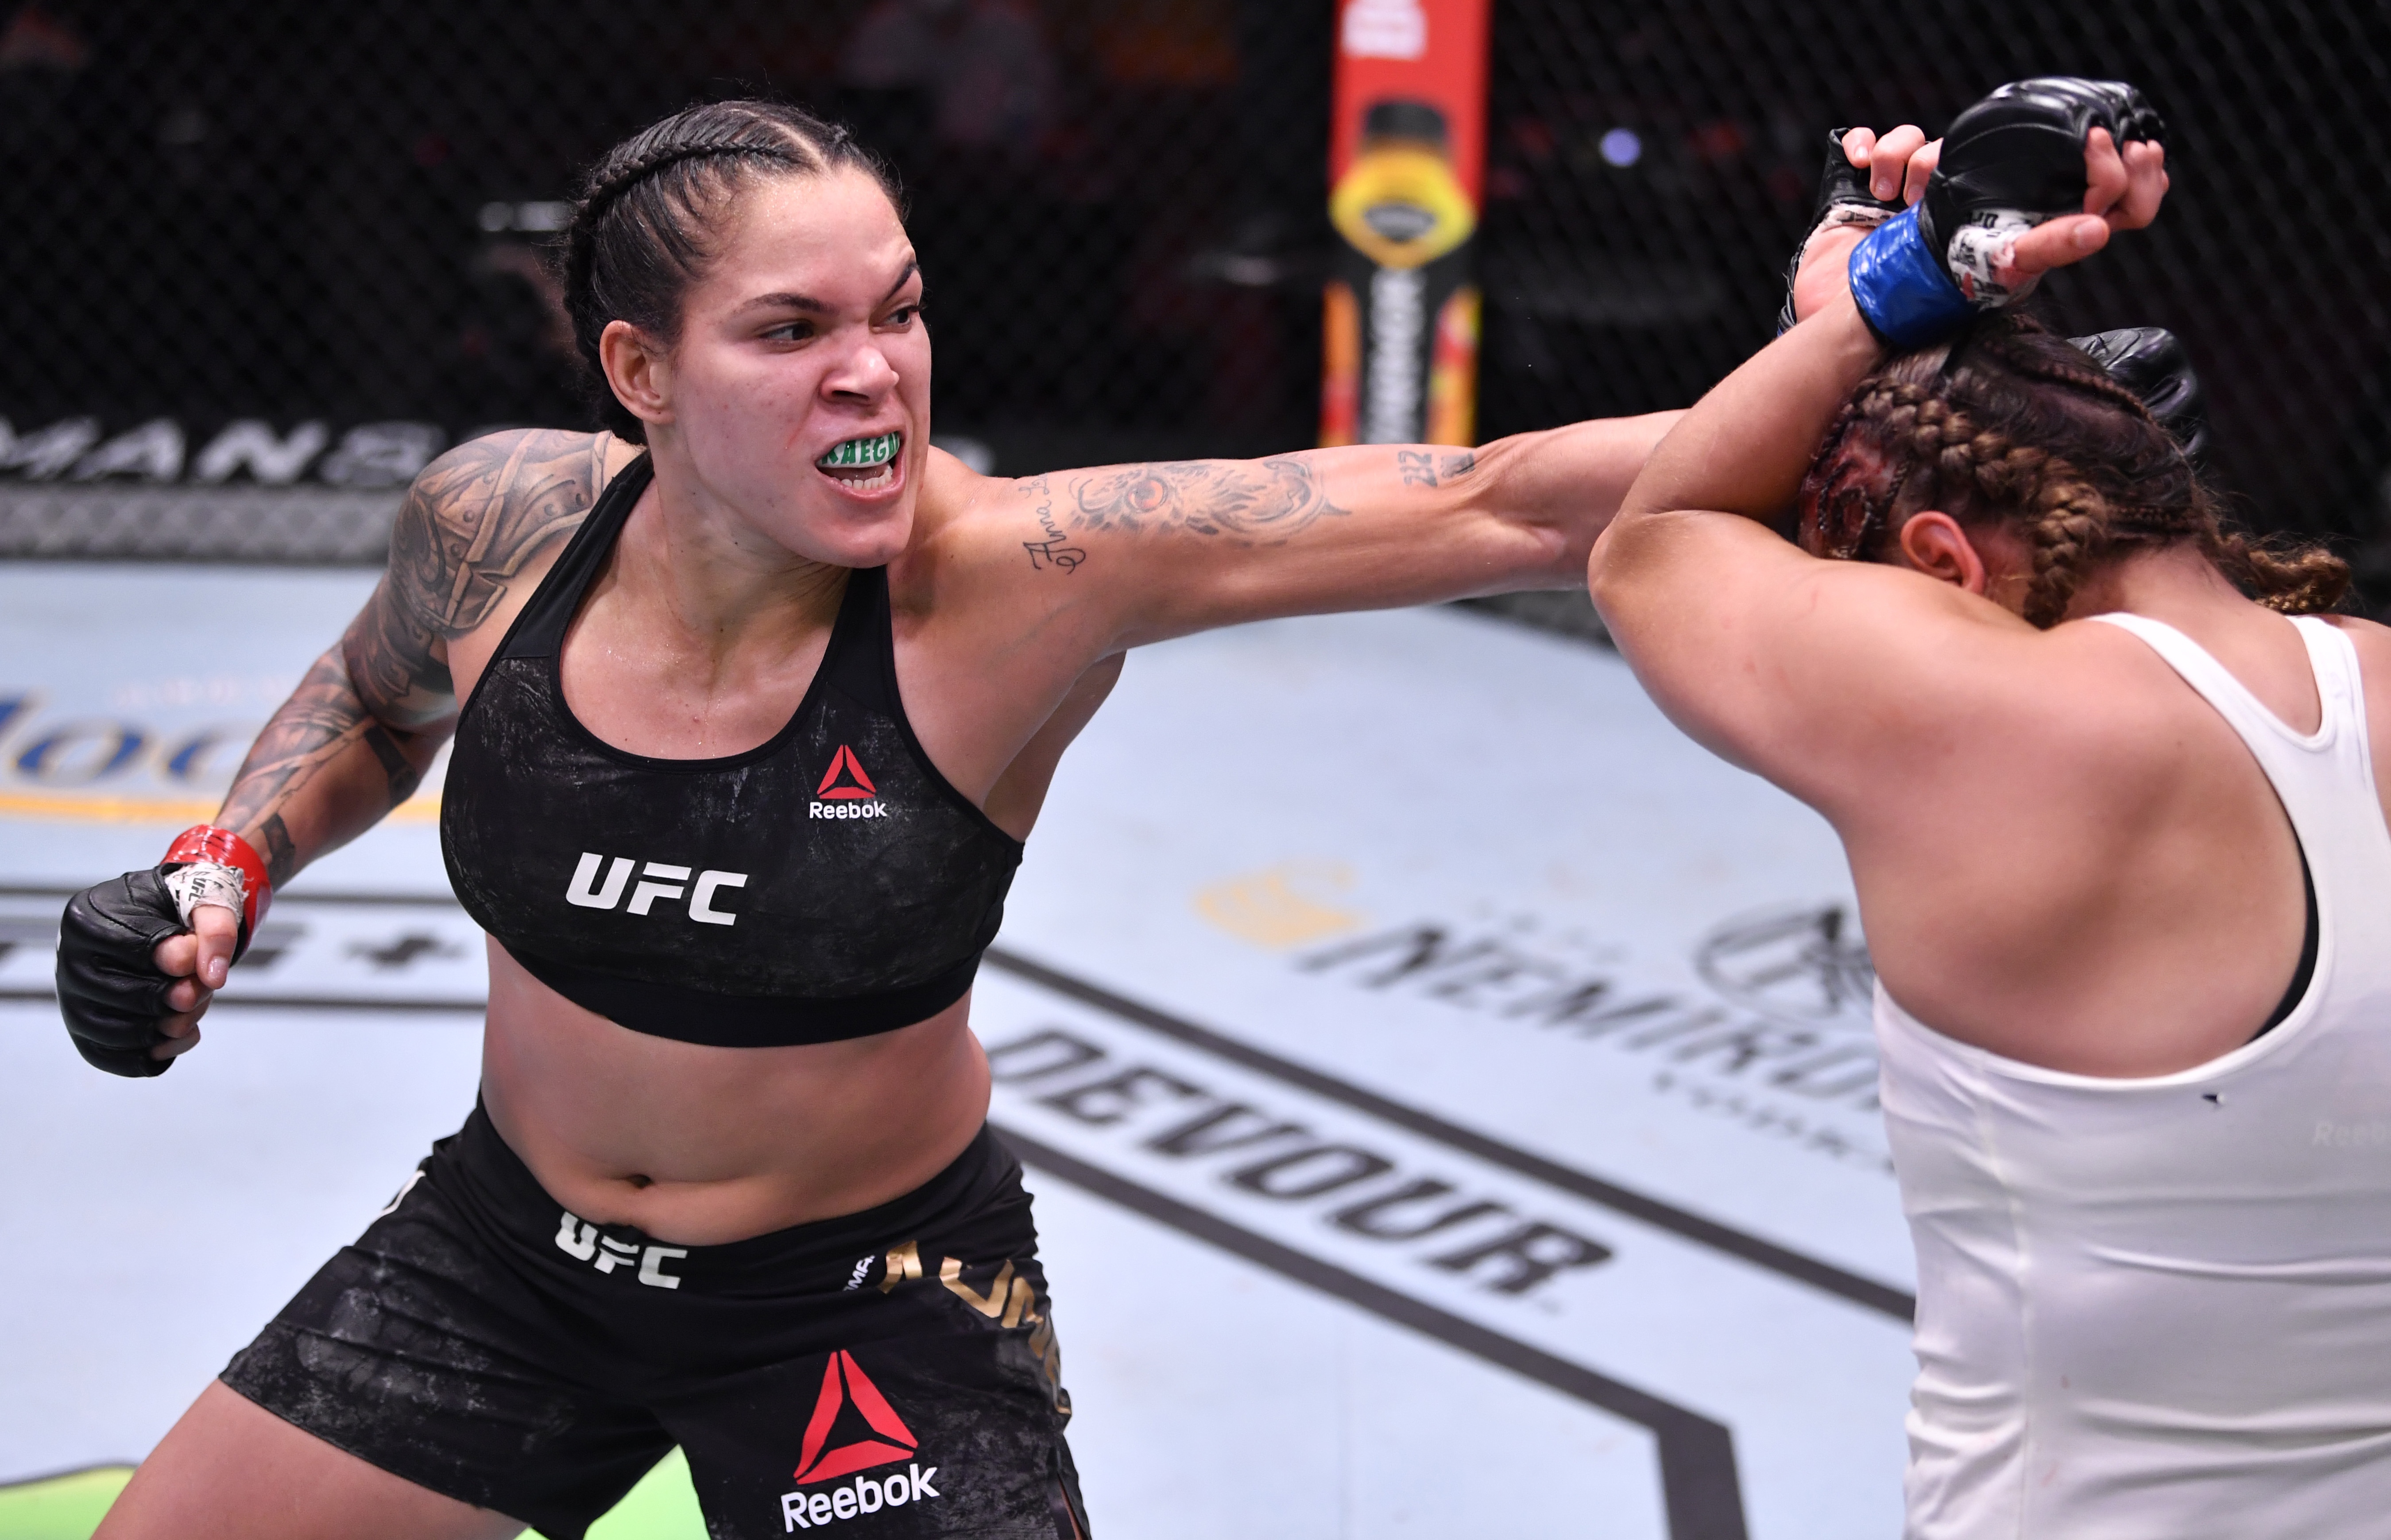 Amanda Nunes of Brazil punches Felicia Spencer of Canada in their UFC featherweight championship bout  during UFC 250 at the UFC APEX, in Las Vegas, NV, USA, on June 6, 2020; Photo: Jeff Bottari/Zuffa LLC via USA TODAY Sports